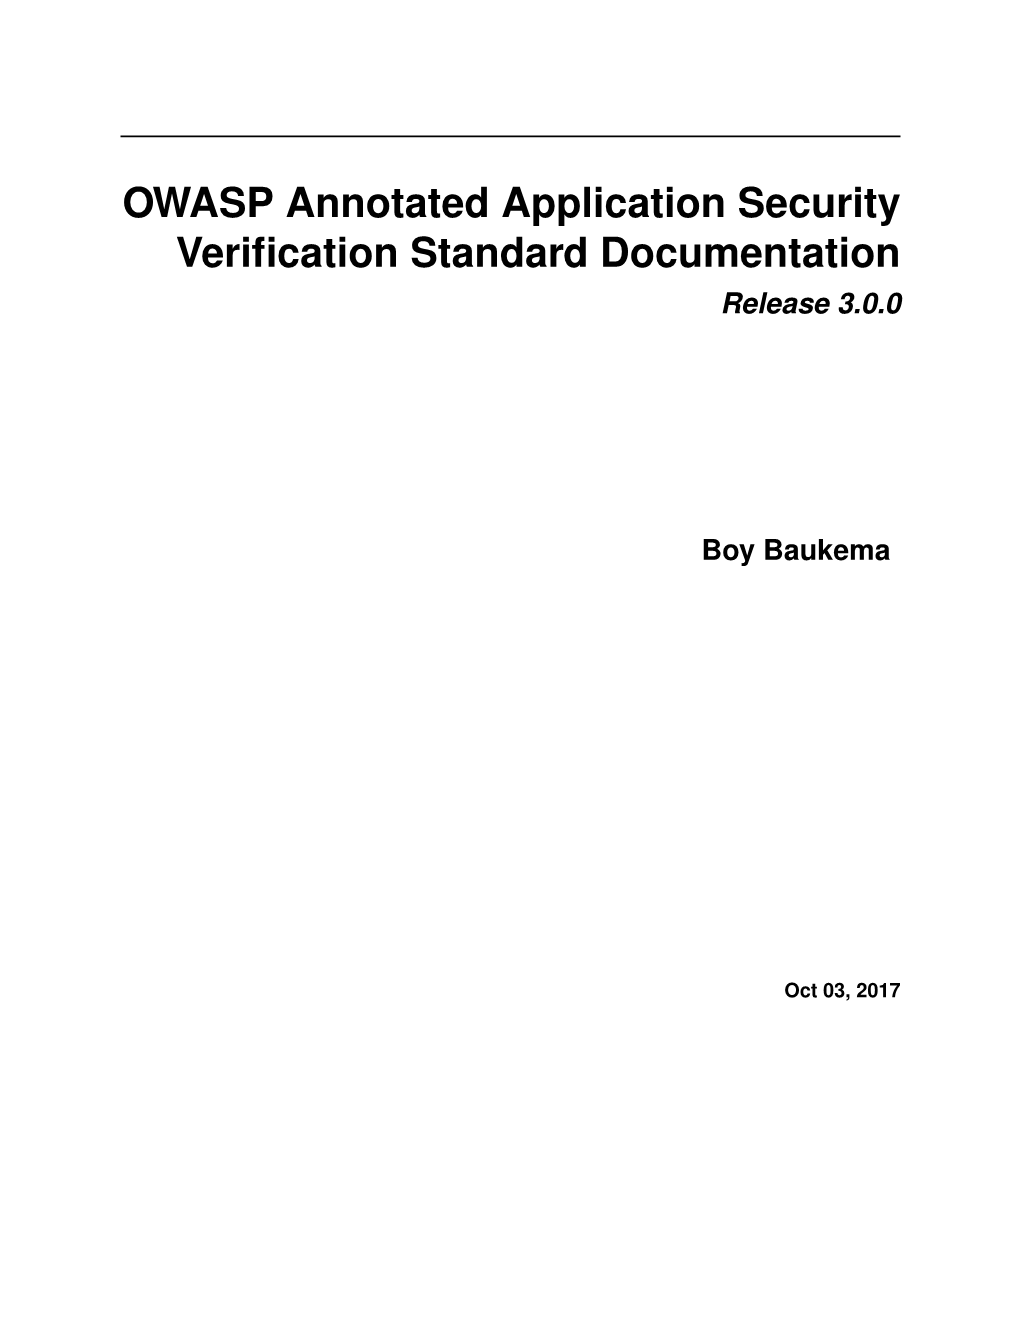 OWASP Annotated Application Security Verification Standard